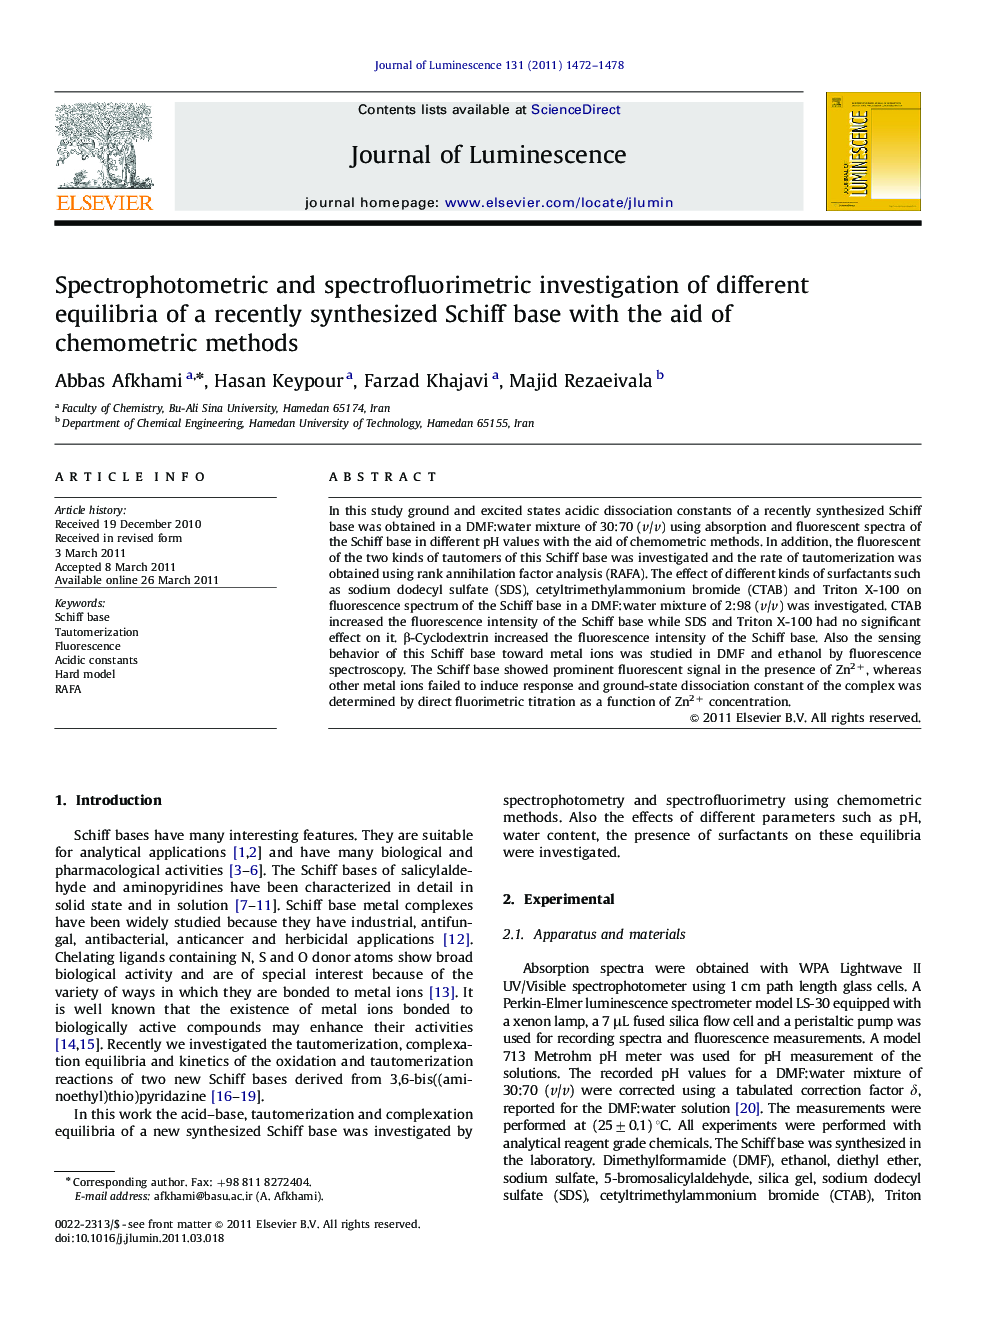 Spectrophotometric and spectrofluorimetric investigation of different equilibria of a recently synthesized Schiff base with the aid of chemometric methods